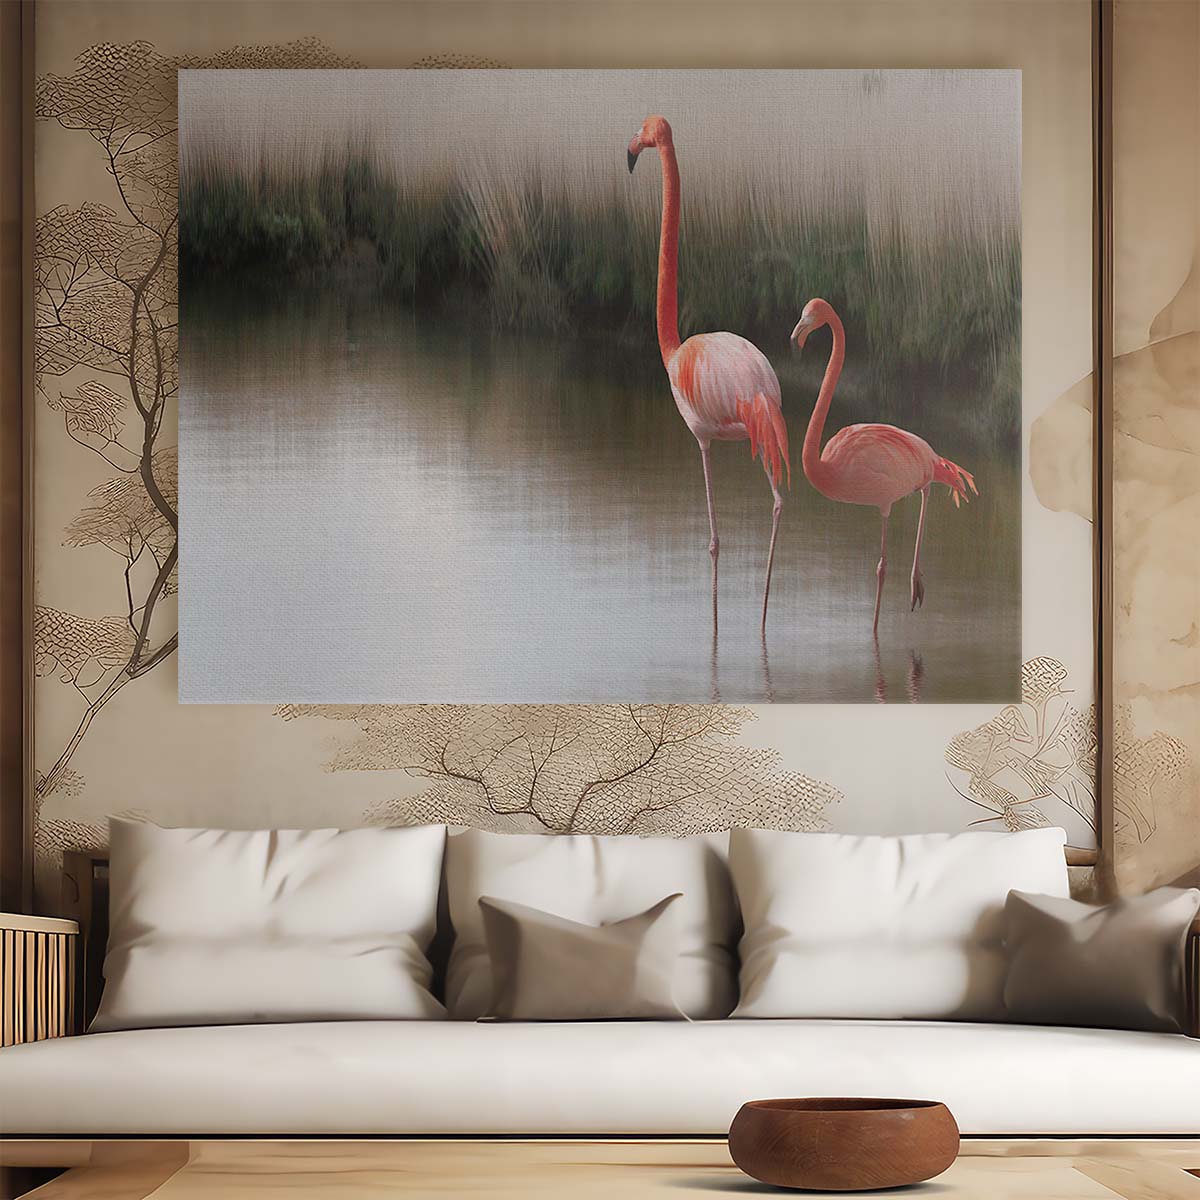 Romantic Flamingo Sunset Pair Love Wall Art by Luxuriance Designs. Made in USA.